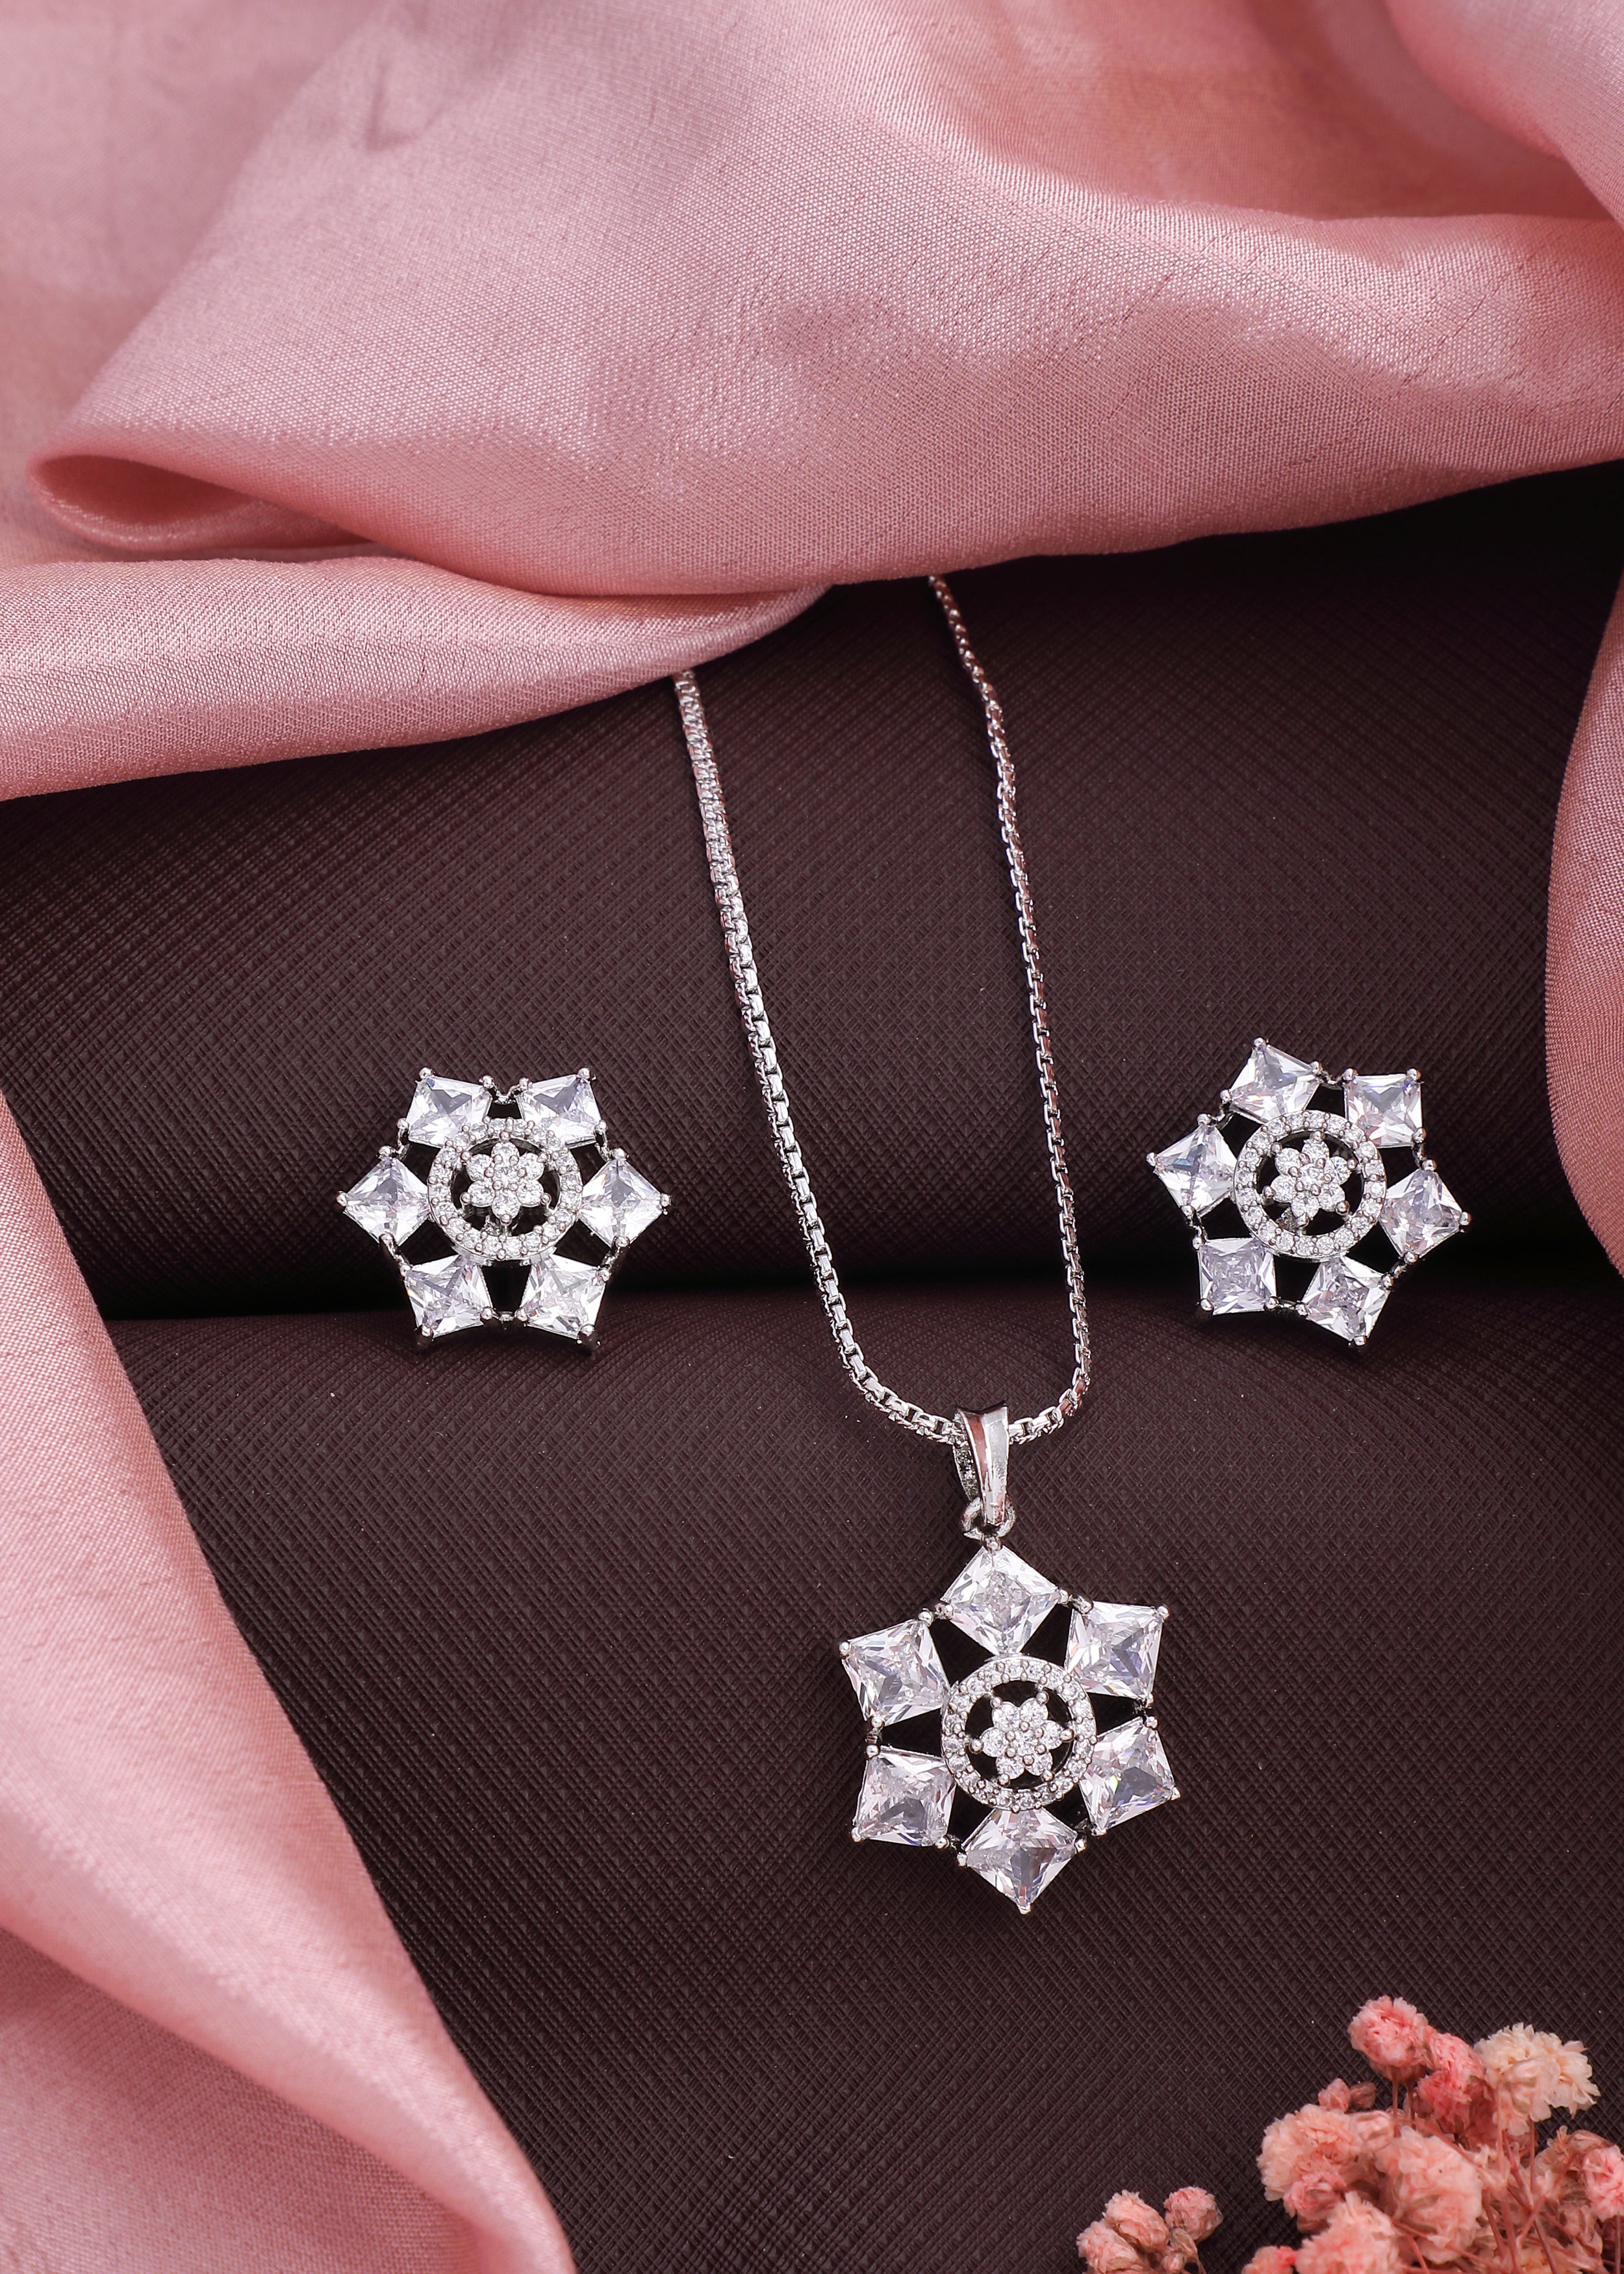 Snowflake Necklace and Earrings Set | oliveandstone